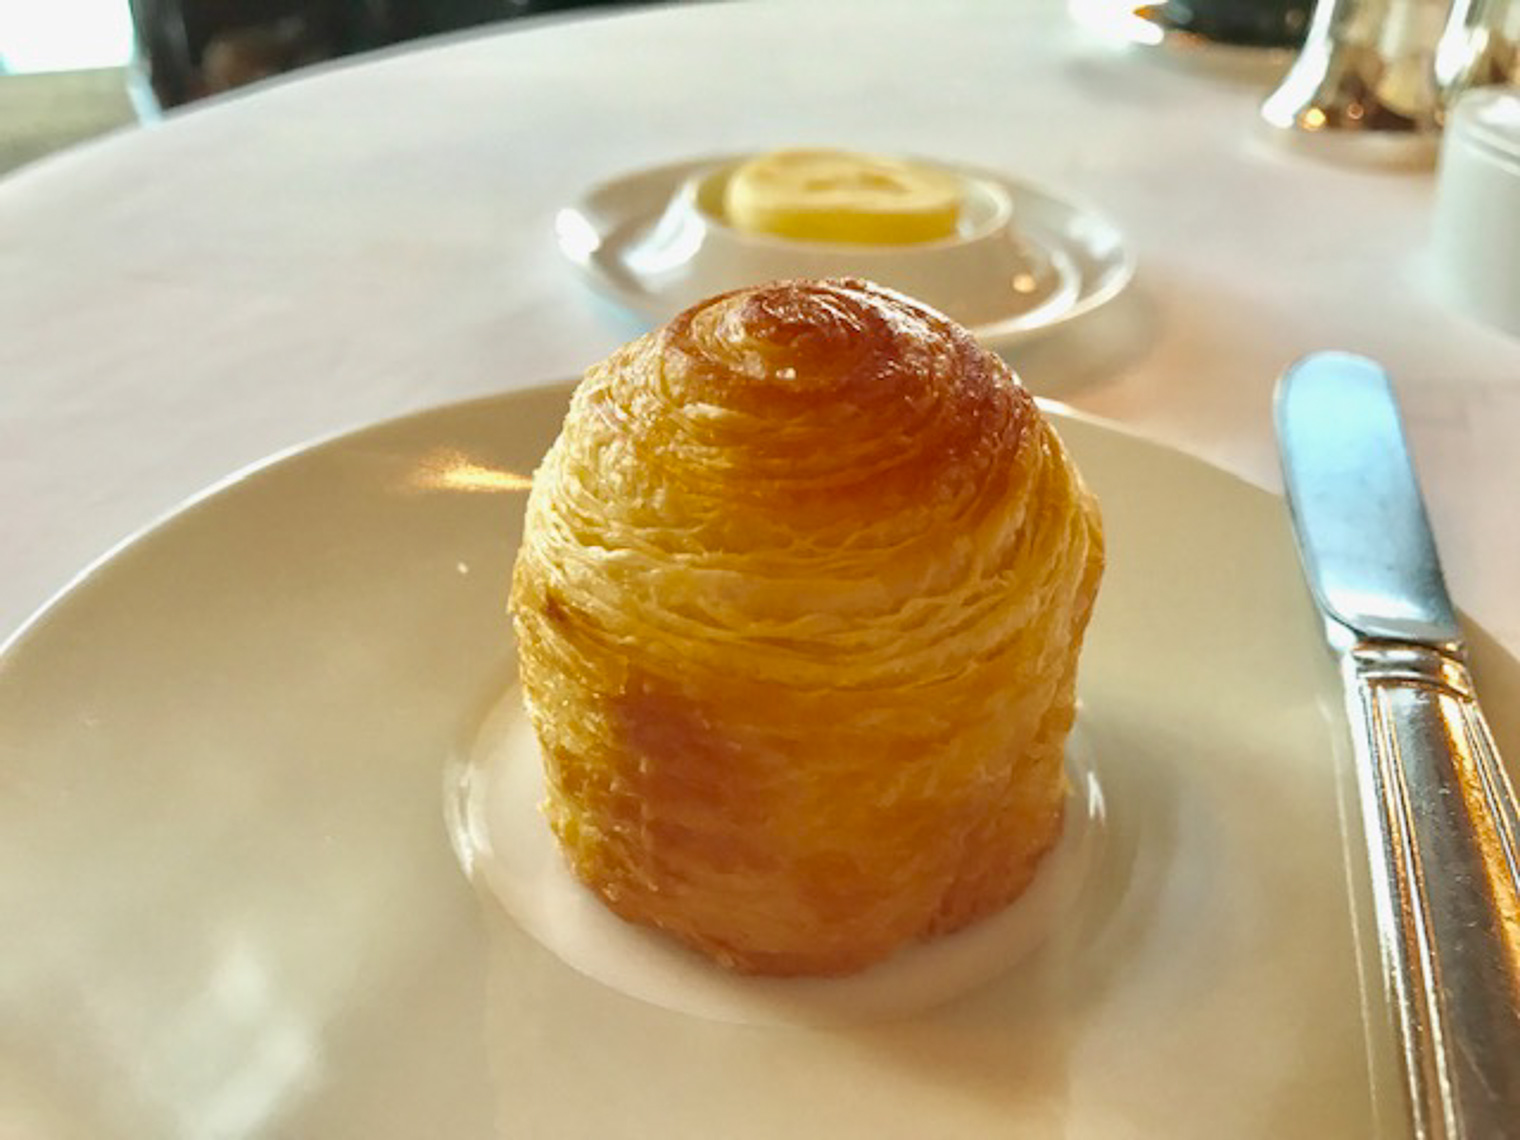 Review of the French restaurant Les Amis